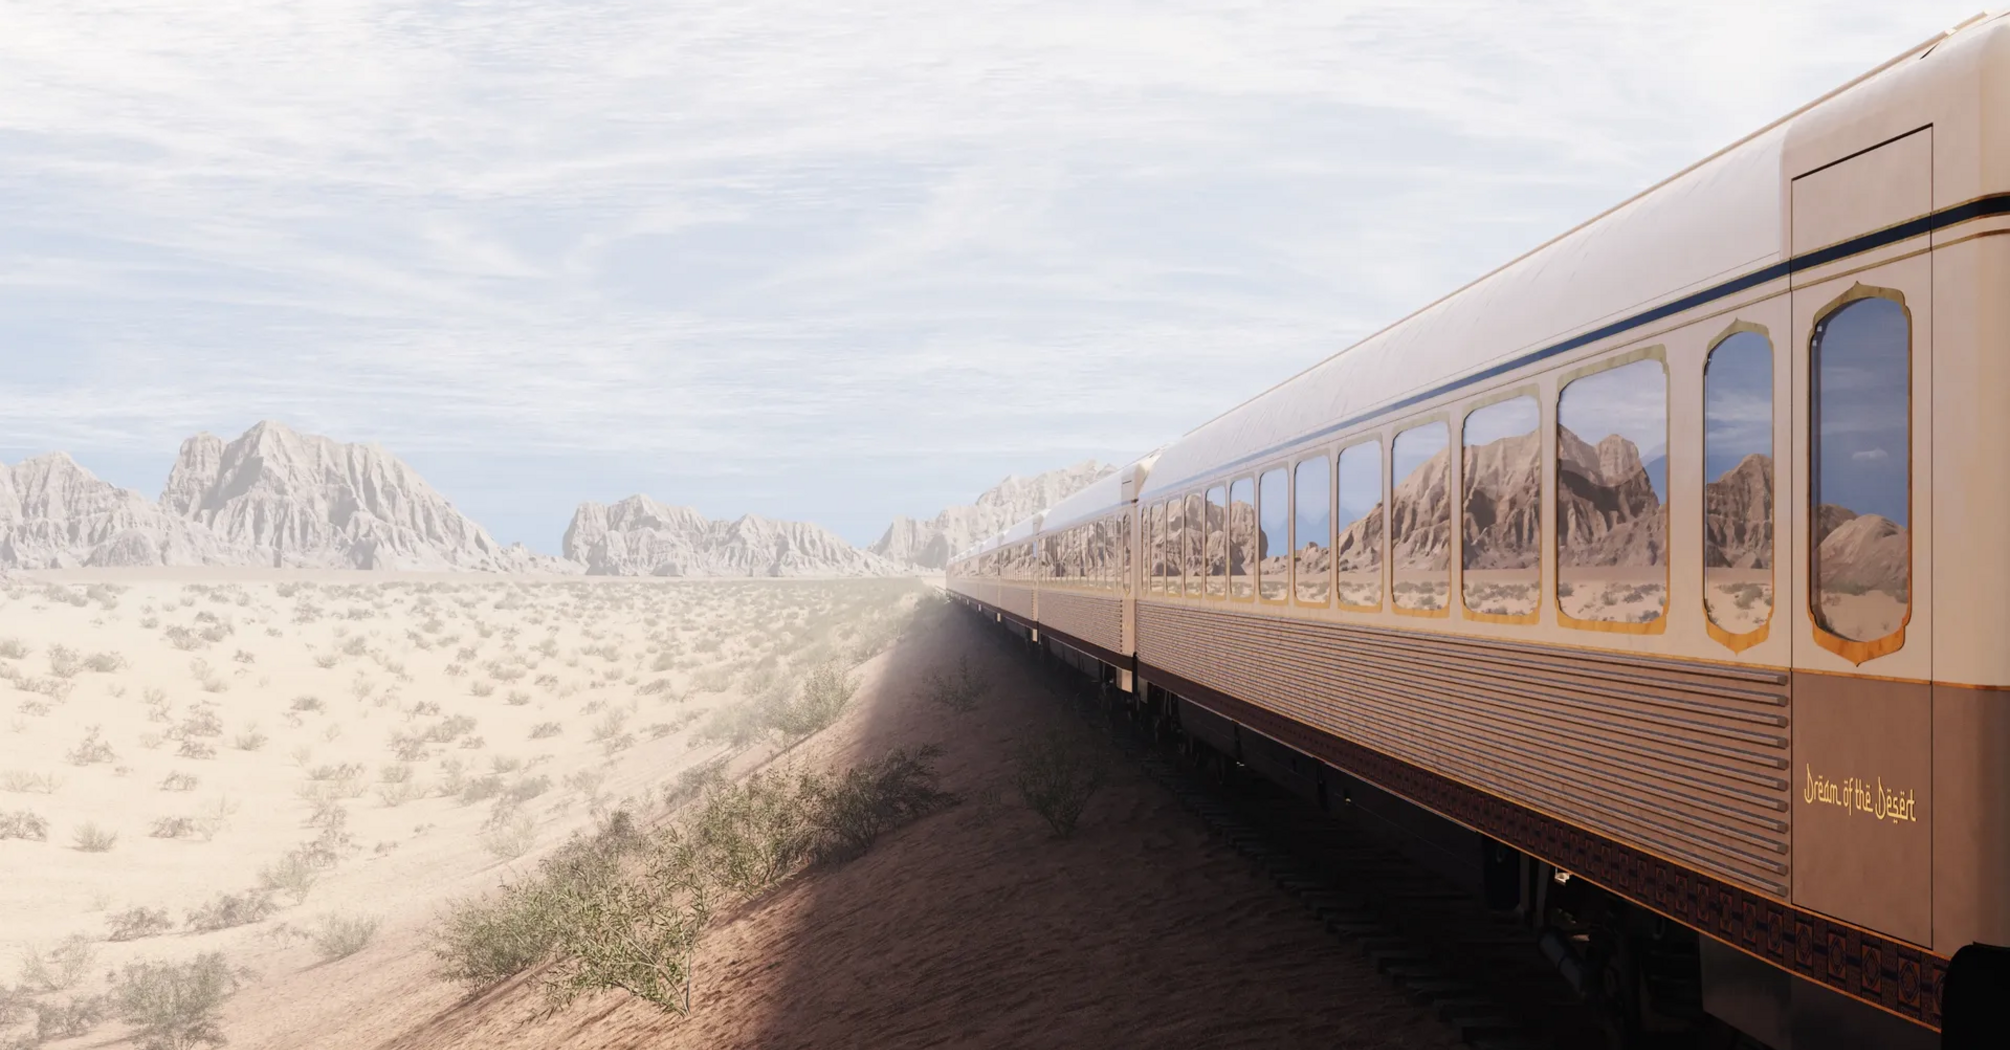 Fascinating journey: Saudi Arabia to launch world's first luxury train across the desert in 2025